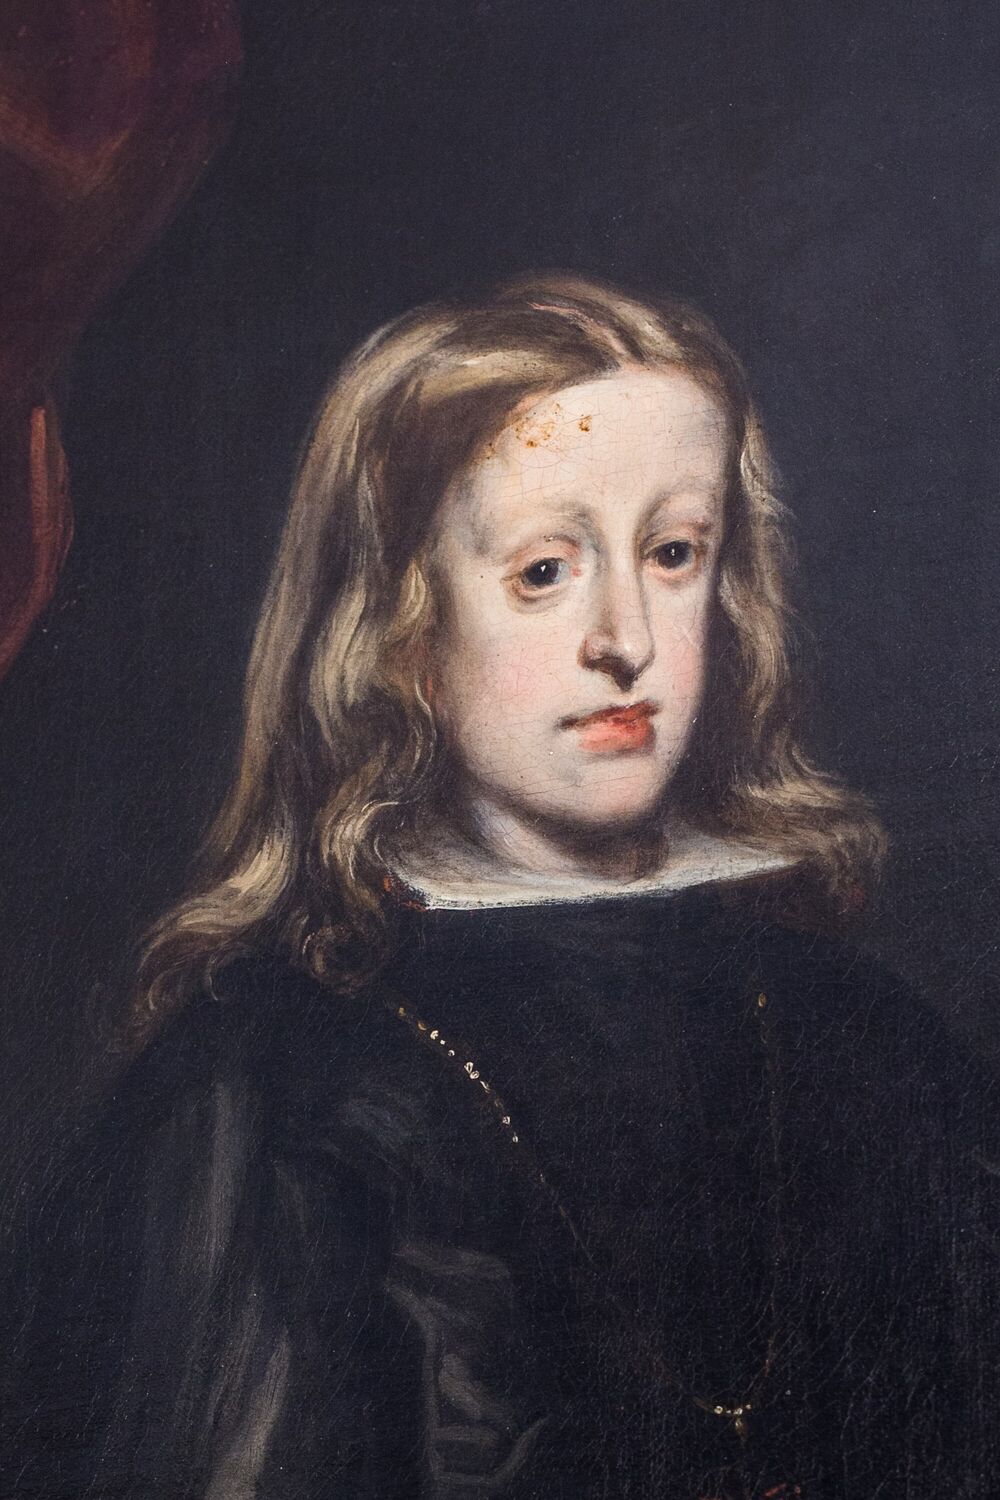 Portrait of a boy with long brown hair. He has an elongated face with a pronounced jaw.